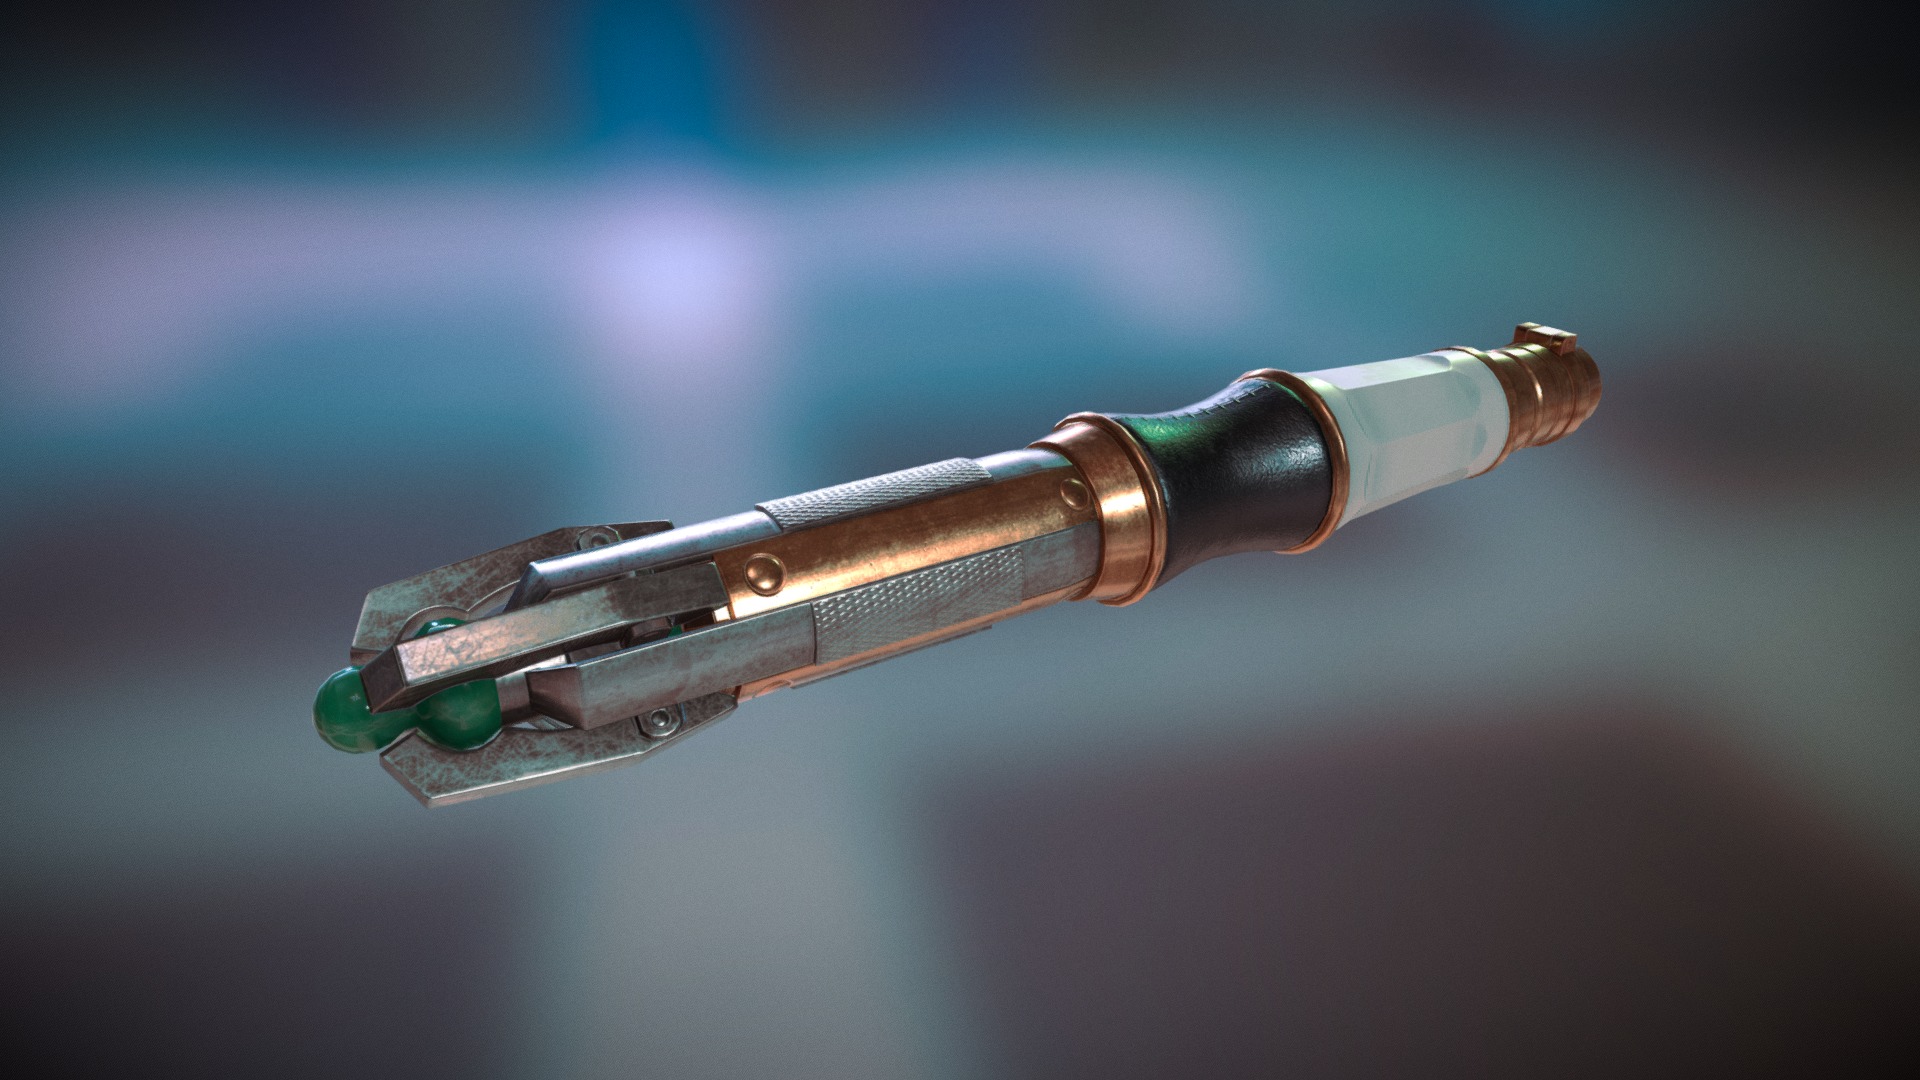 3D model 12-13th Doctor sonic screwdriver © BBC - This is a 3D model of the 12-13th Doctor sonic screwdriver © BBC. The 3D model is about a close-up of a sword.